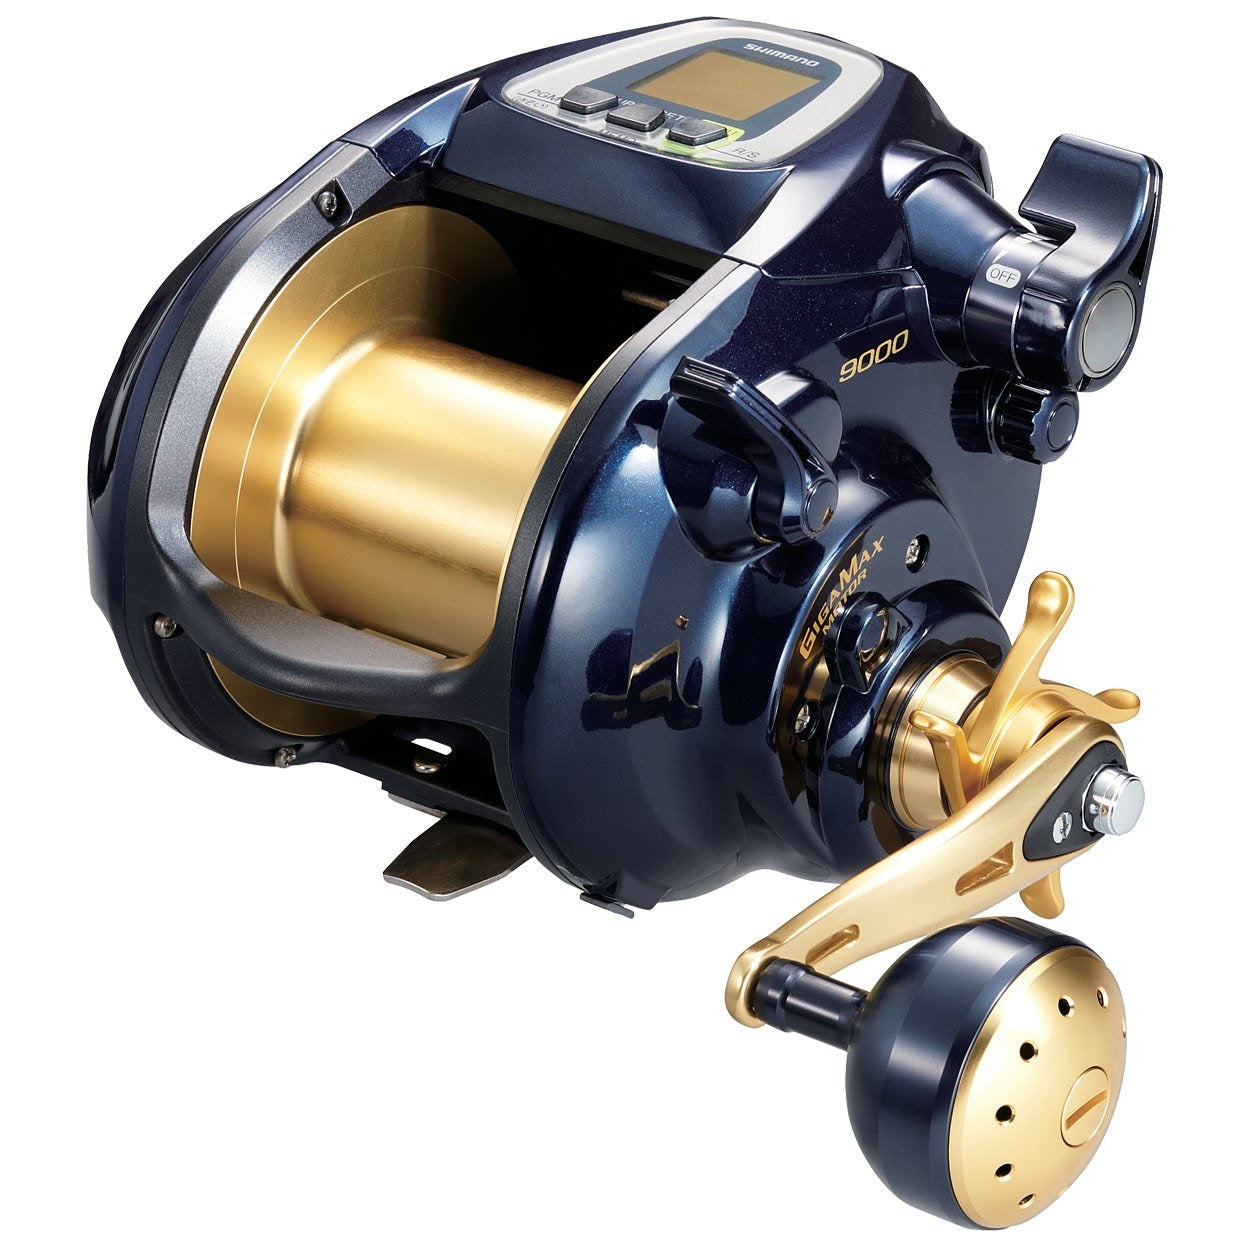 Shop for Fishing Gear Online - Rods, Reels, Lures & more Page 46